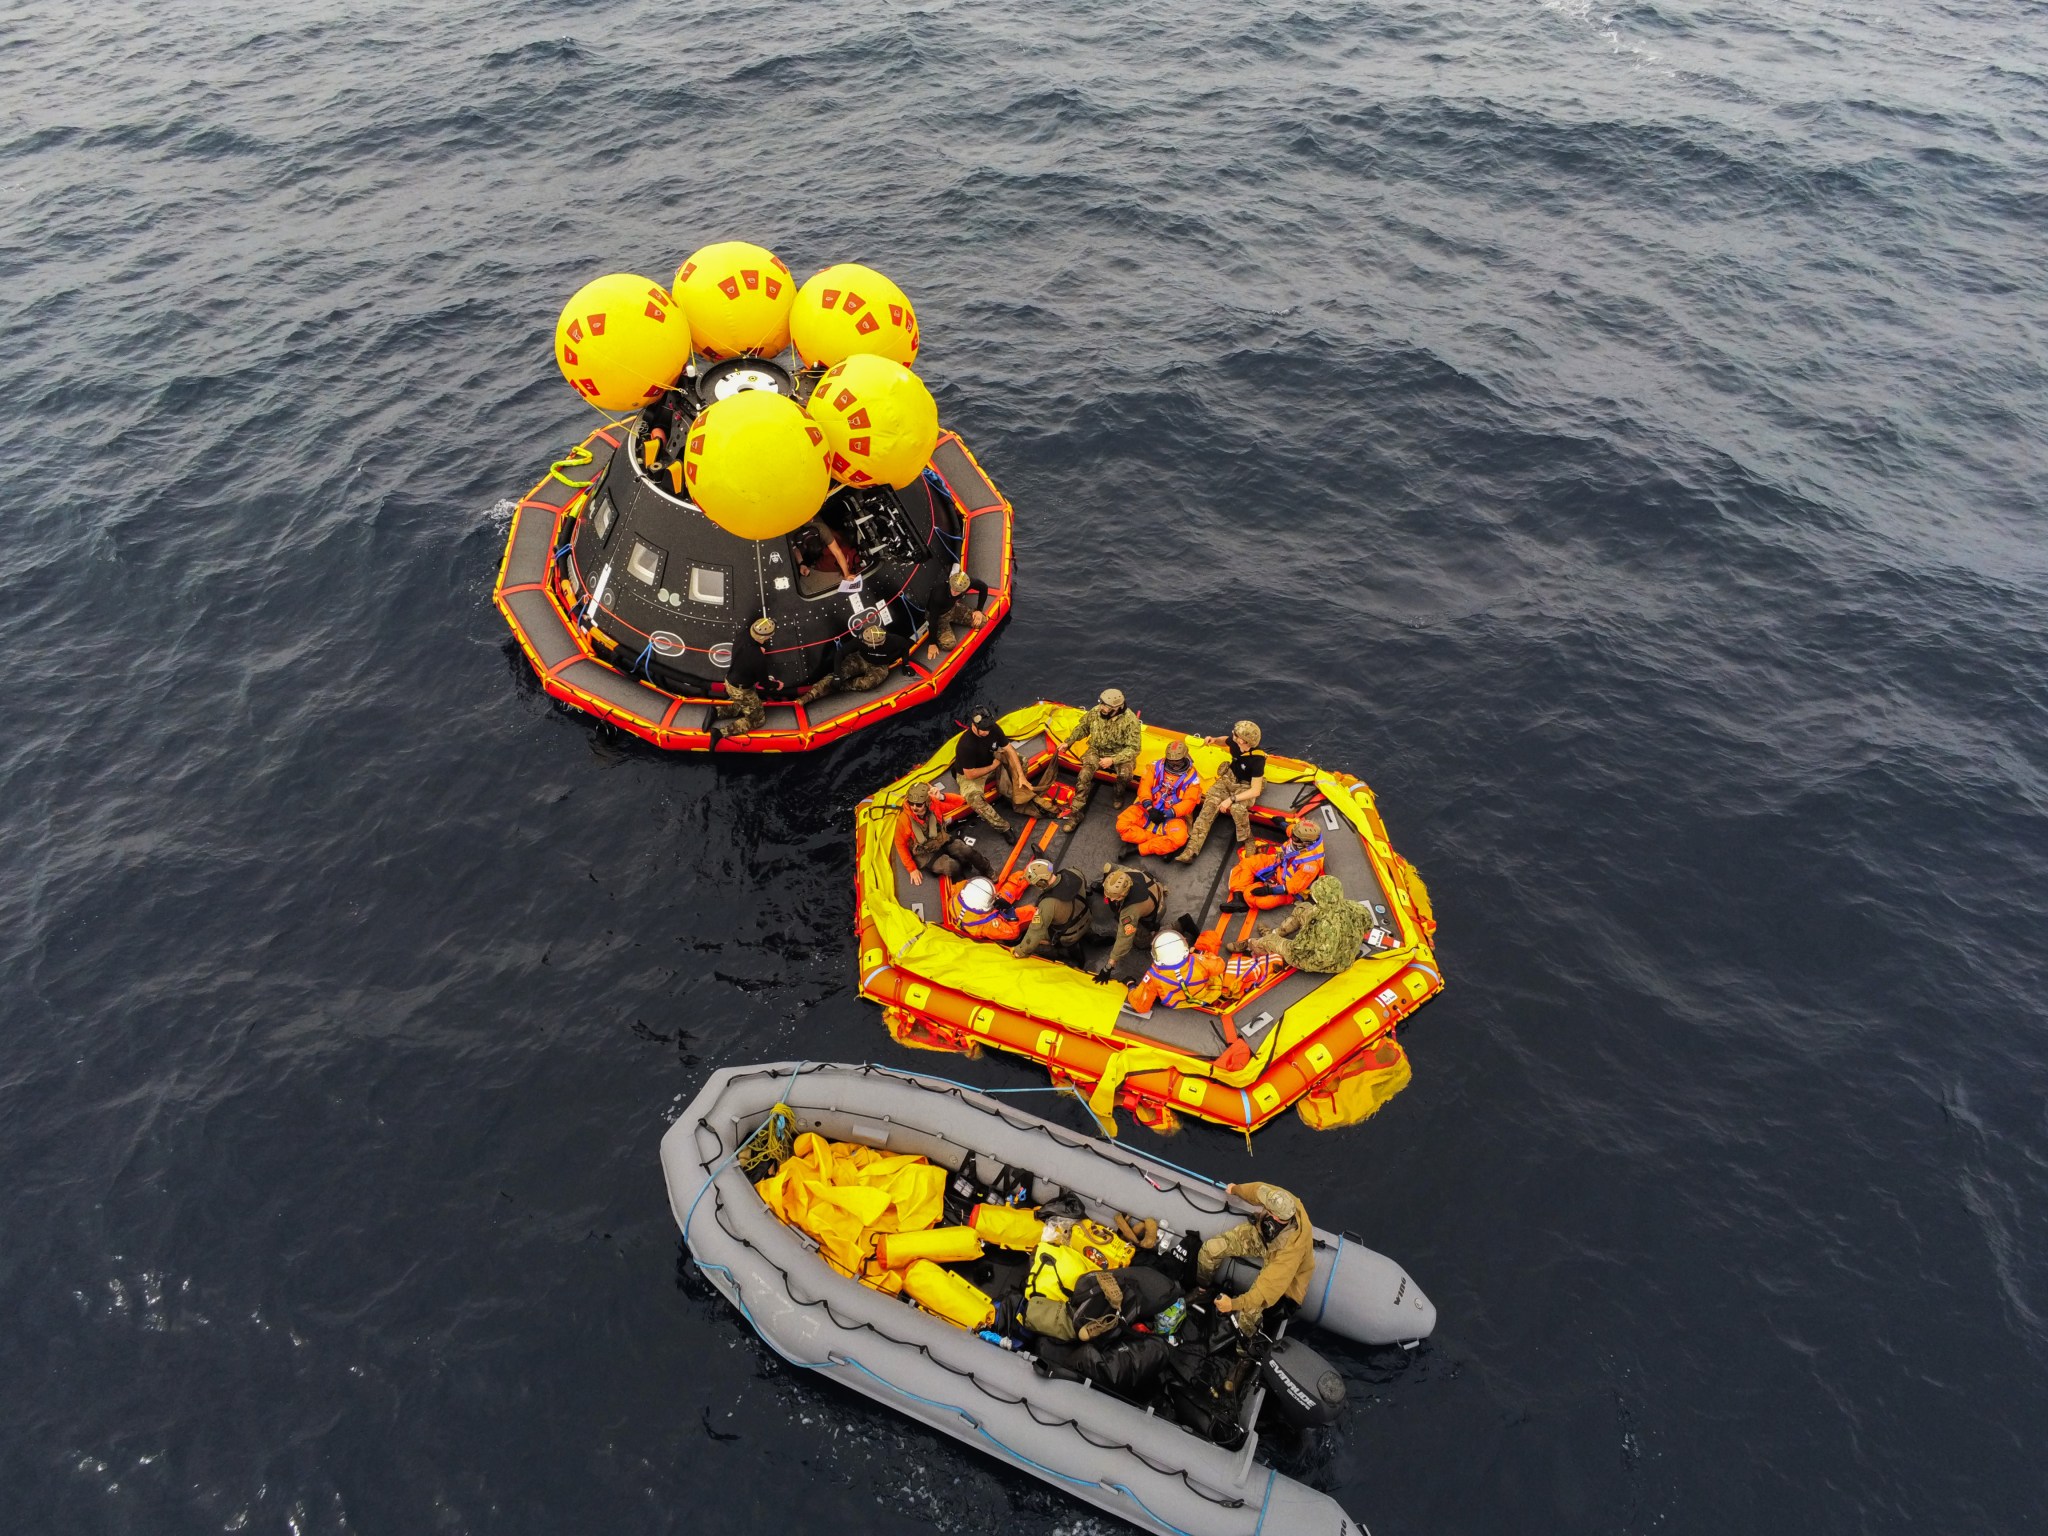 Splashdown 101: Joint Team to Recover Crew, Orion After Moon Missions